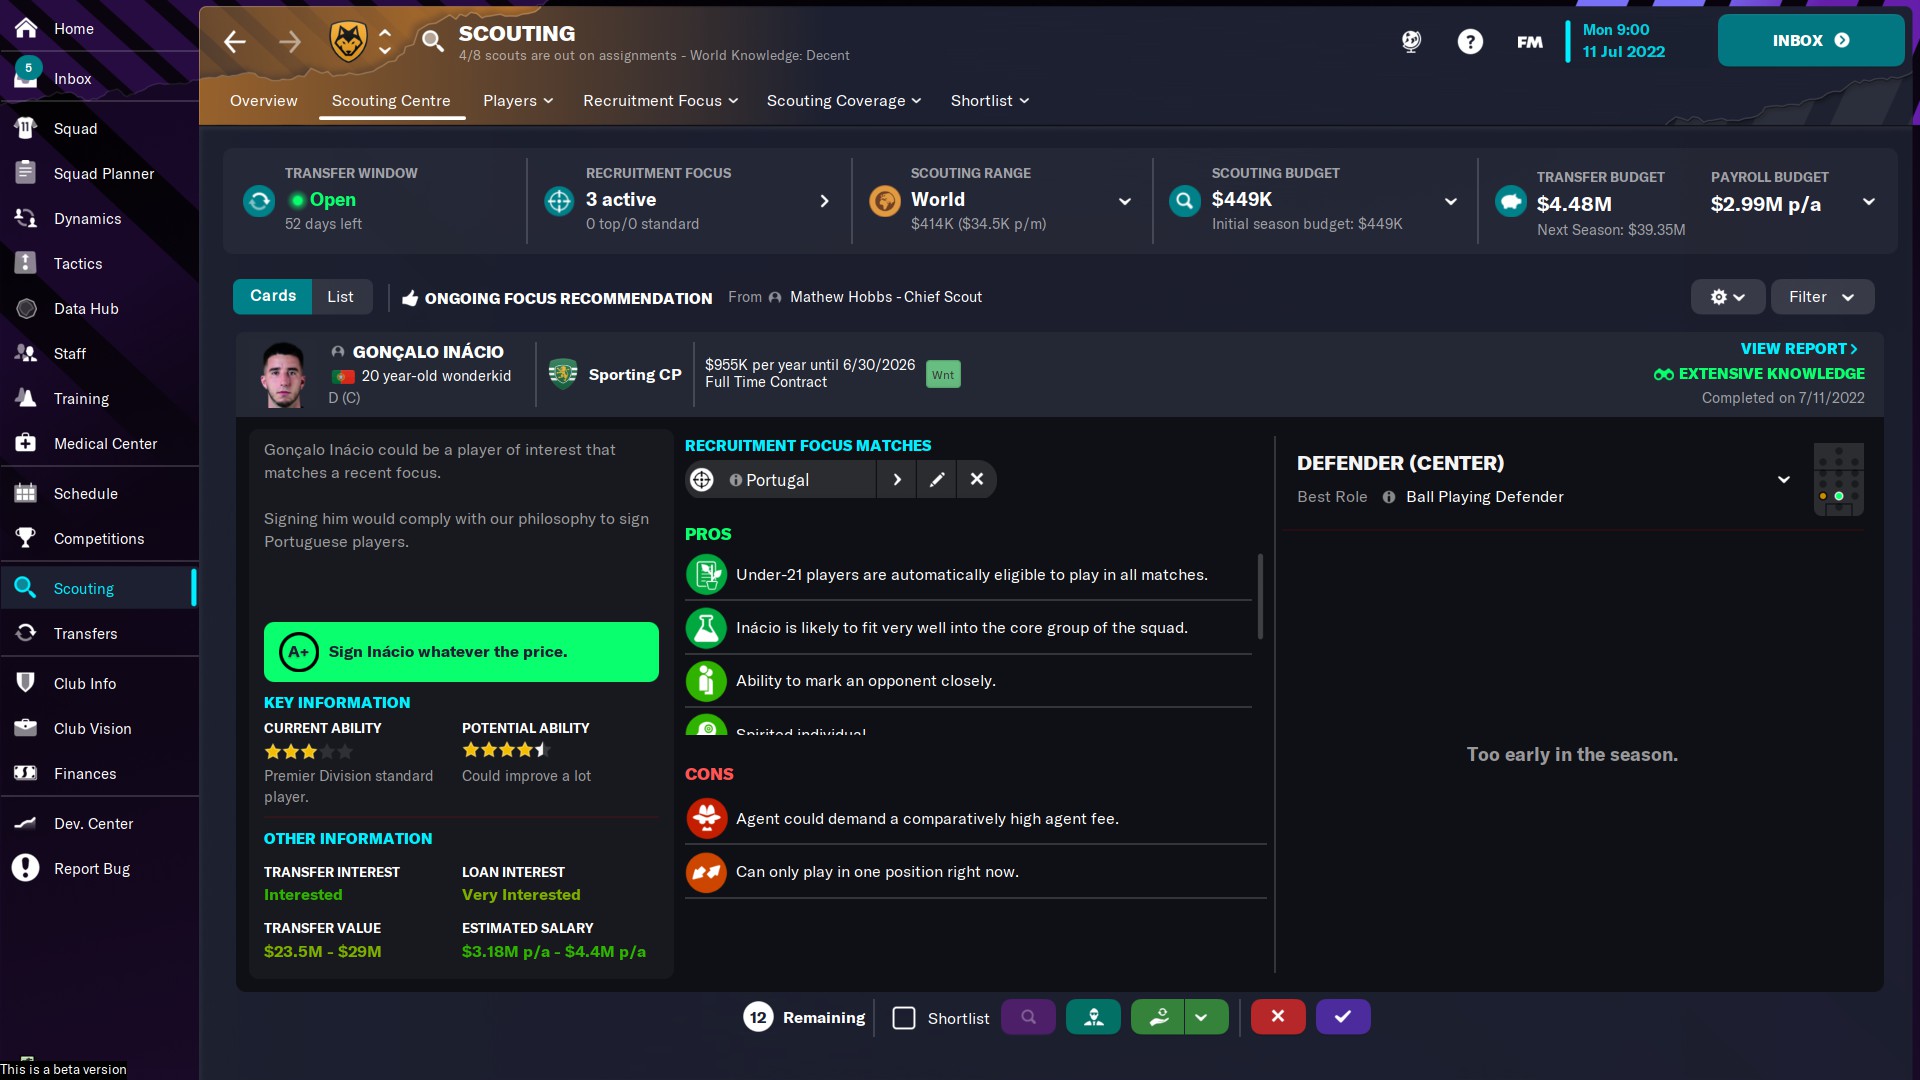 Football Manager 2023 - Guide to Managing a New Club - Scouting and Transfers - 31480C2